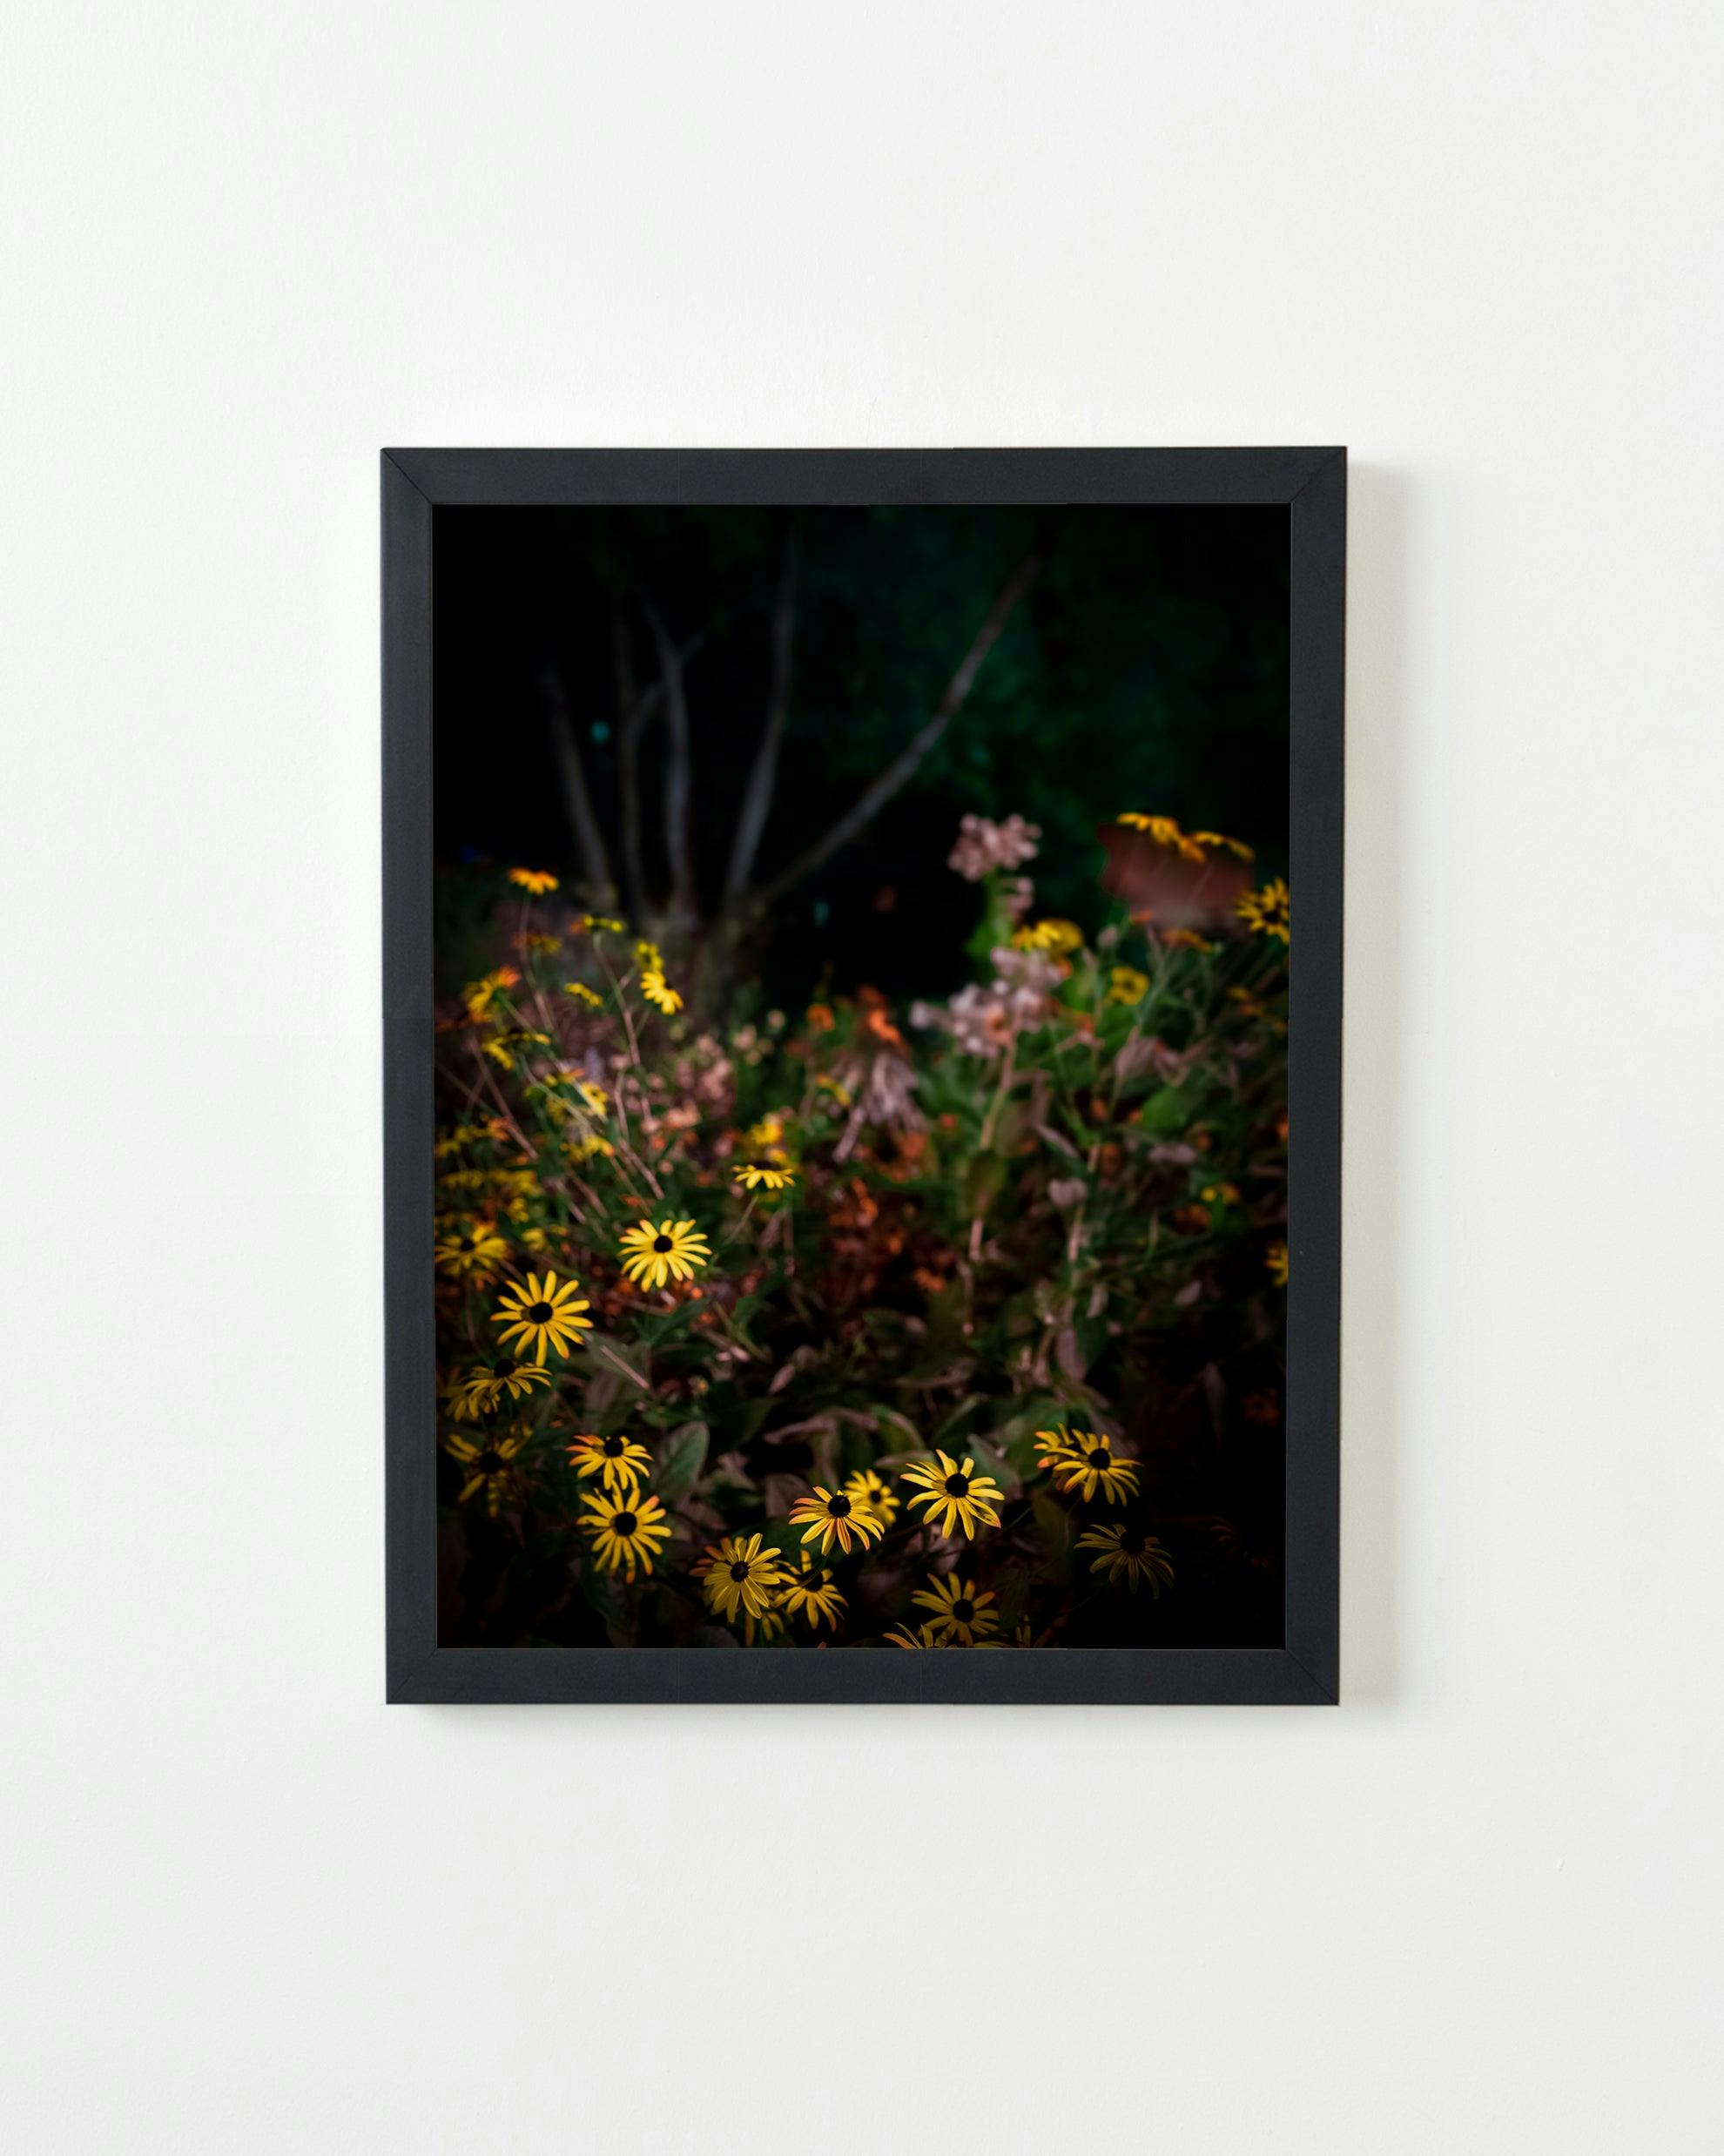 Photography by Anna Beeke titled "Midnight in the Garden #7".